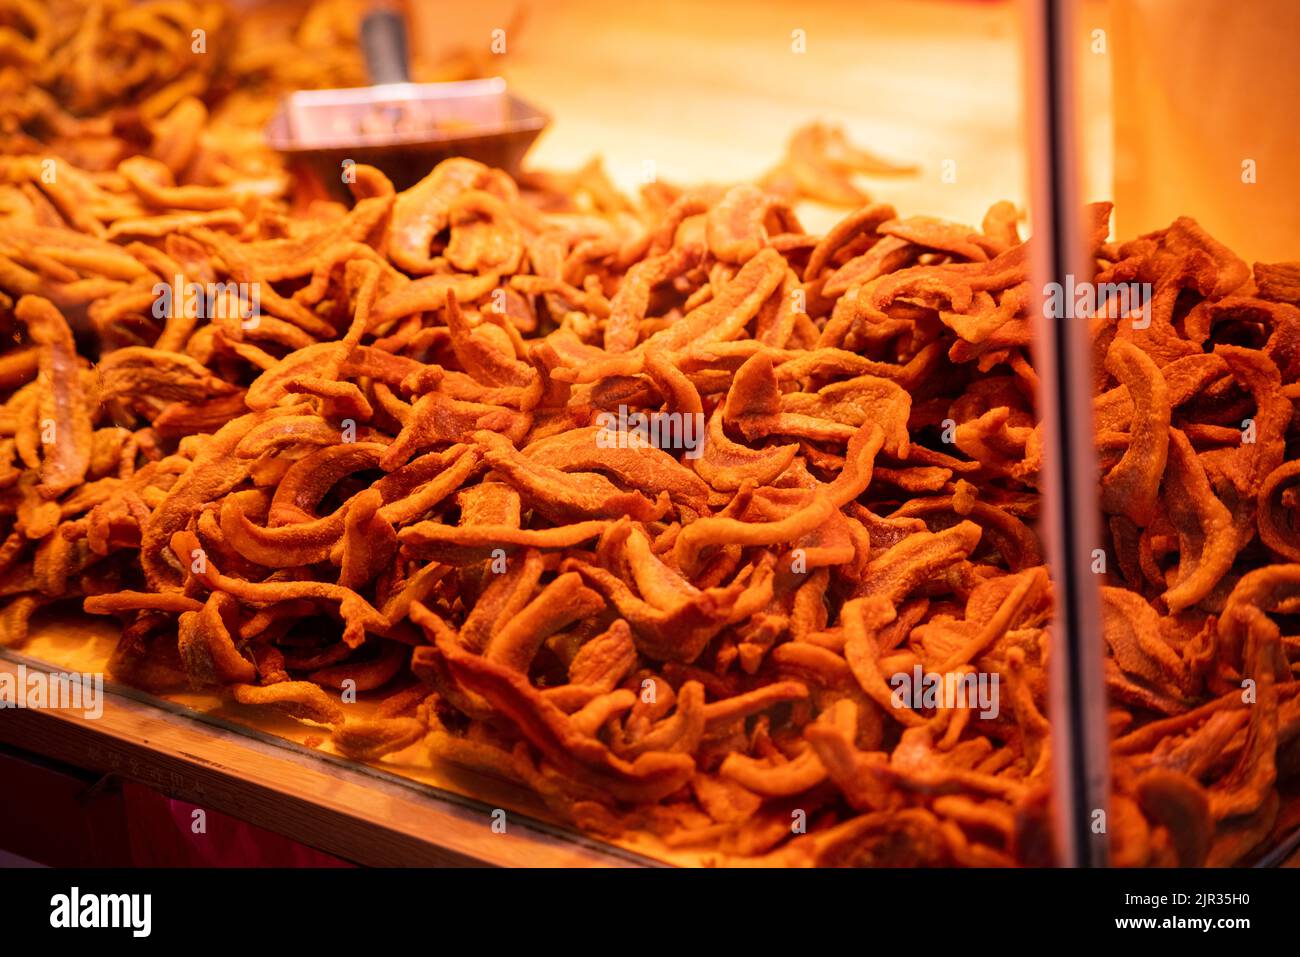 Fried pork skin and meat Stock Photo